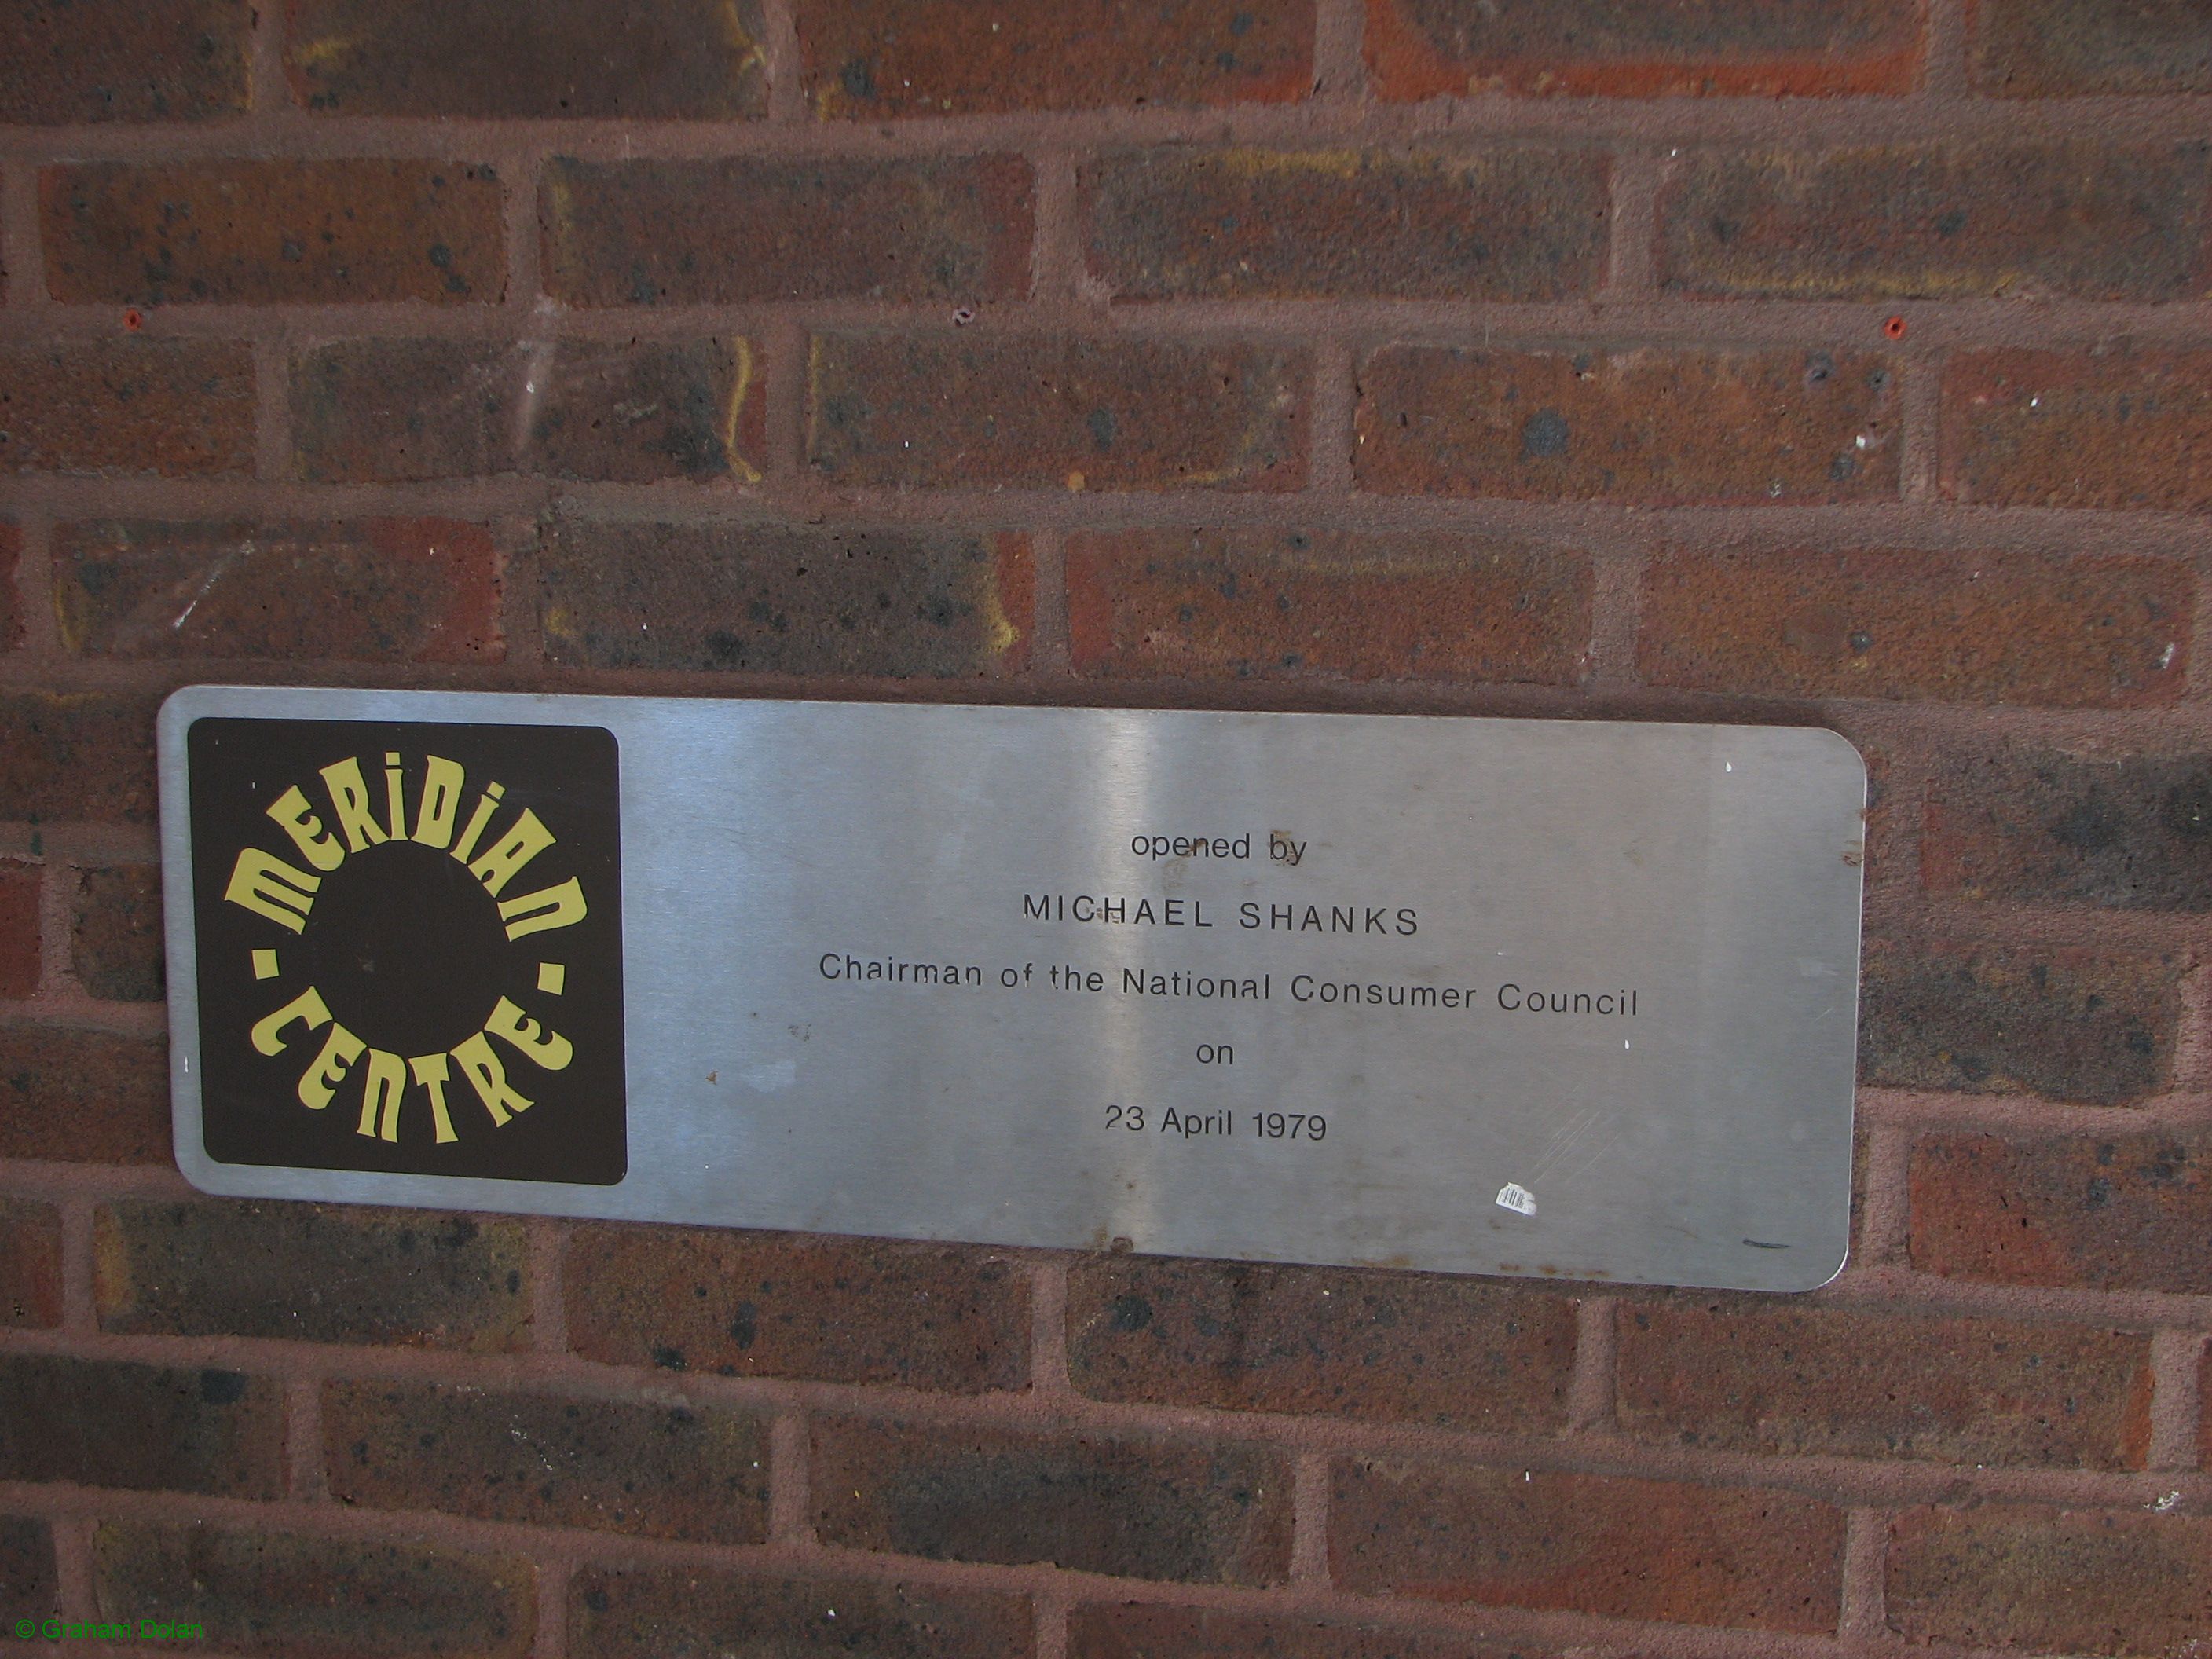 Greenwich Meridian Marker; England; East Sussex; Peacehaven